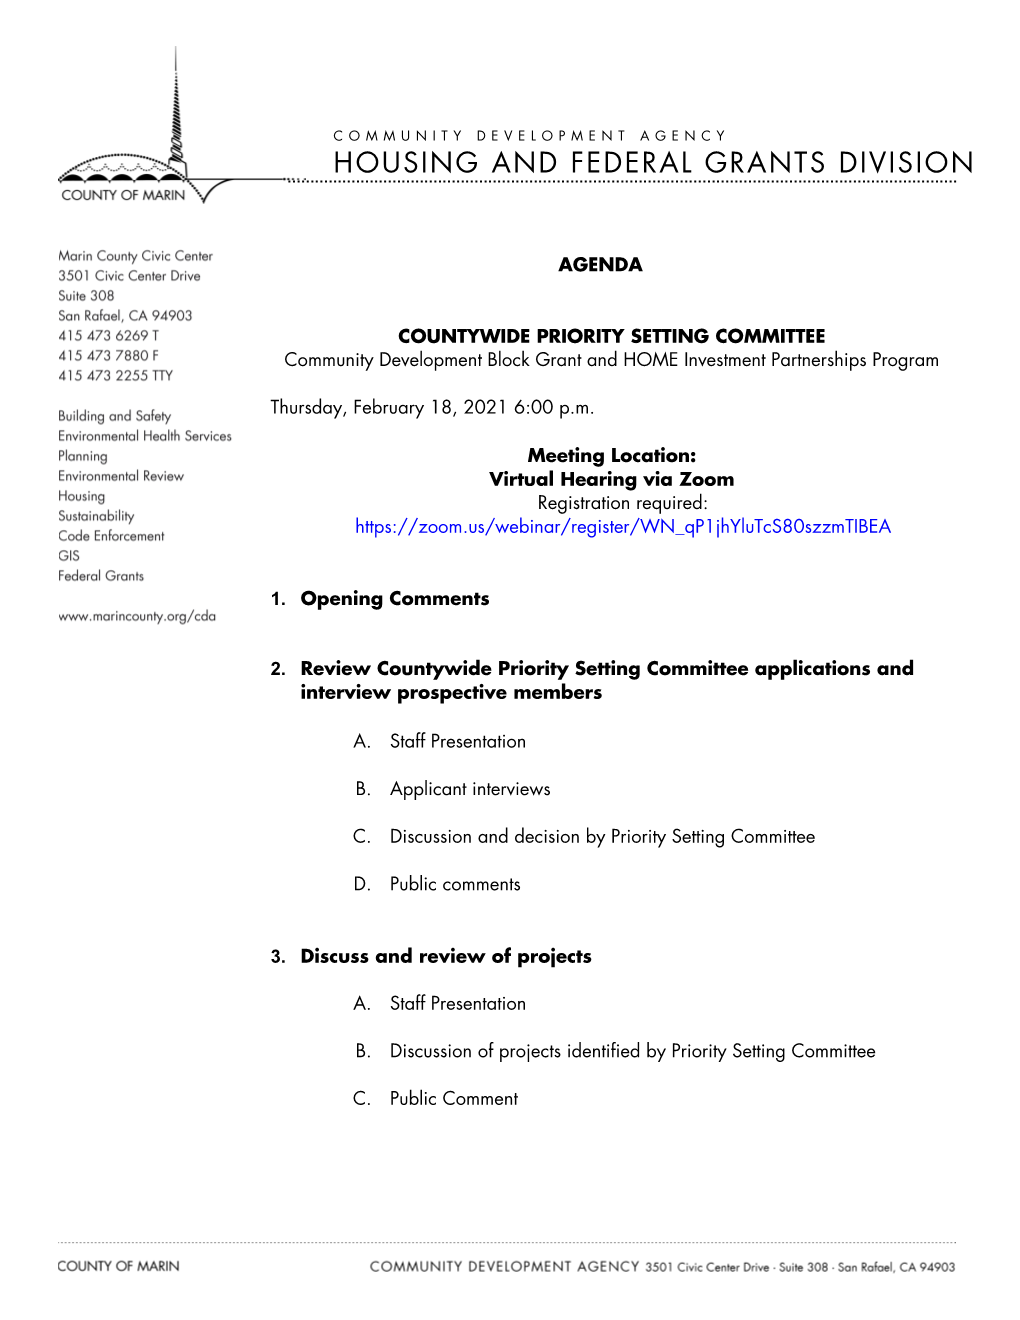 Housing and Federal Grants Division